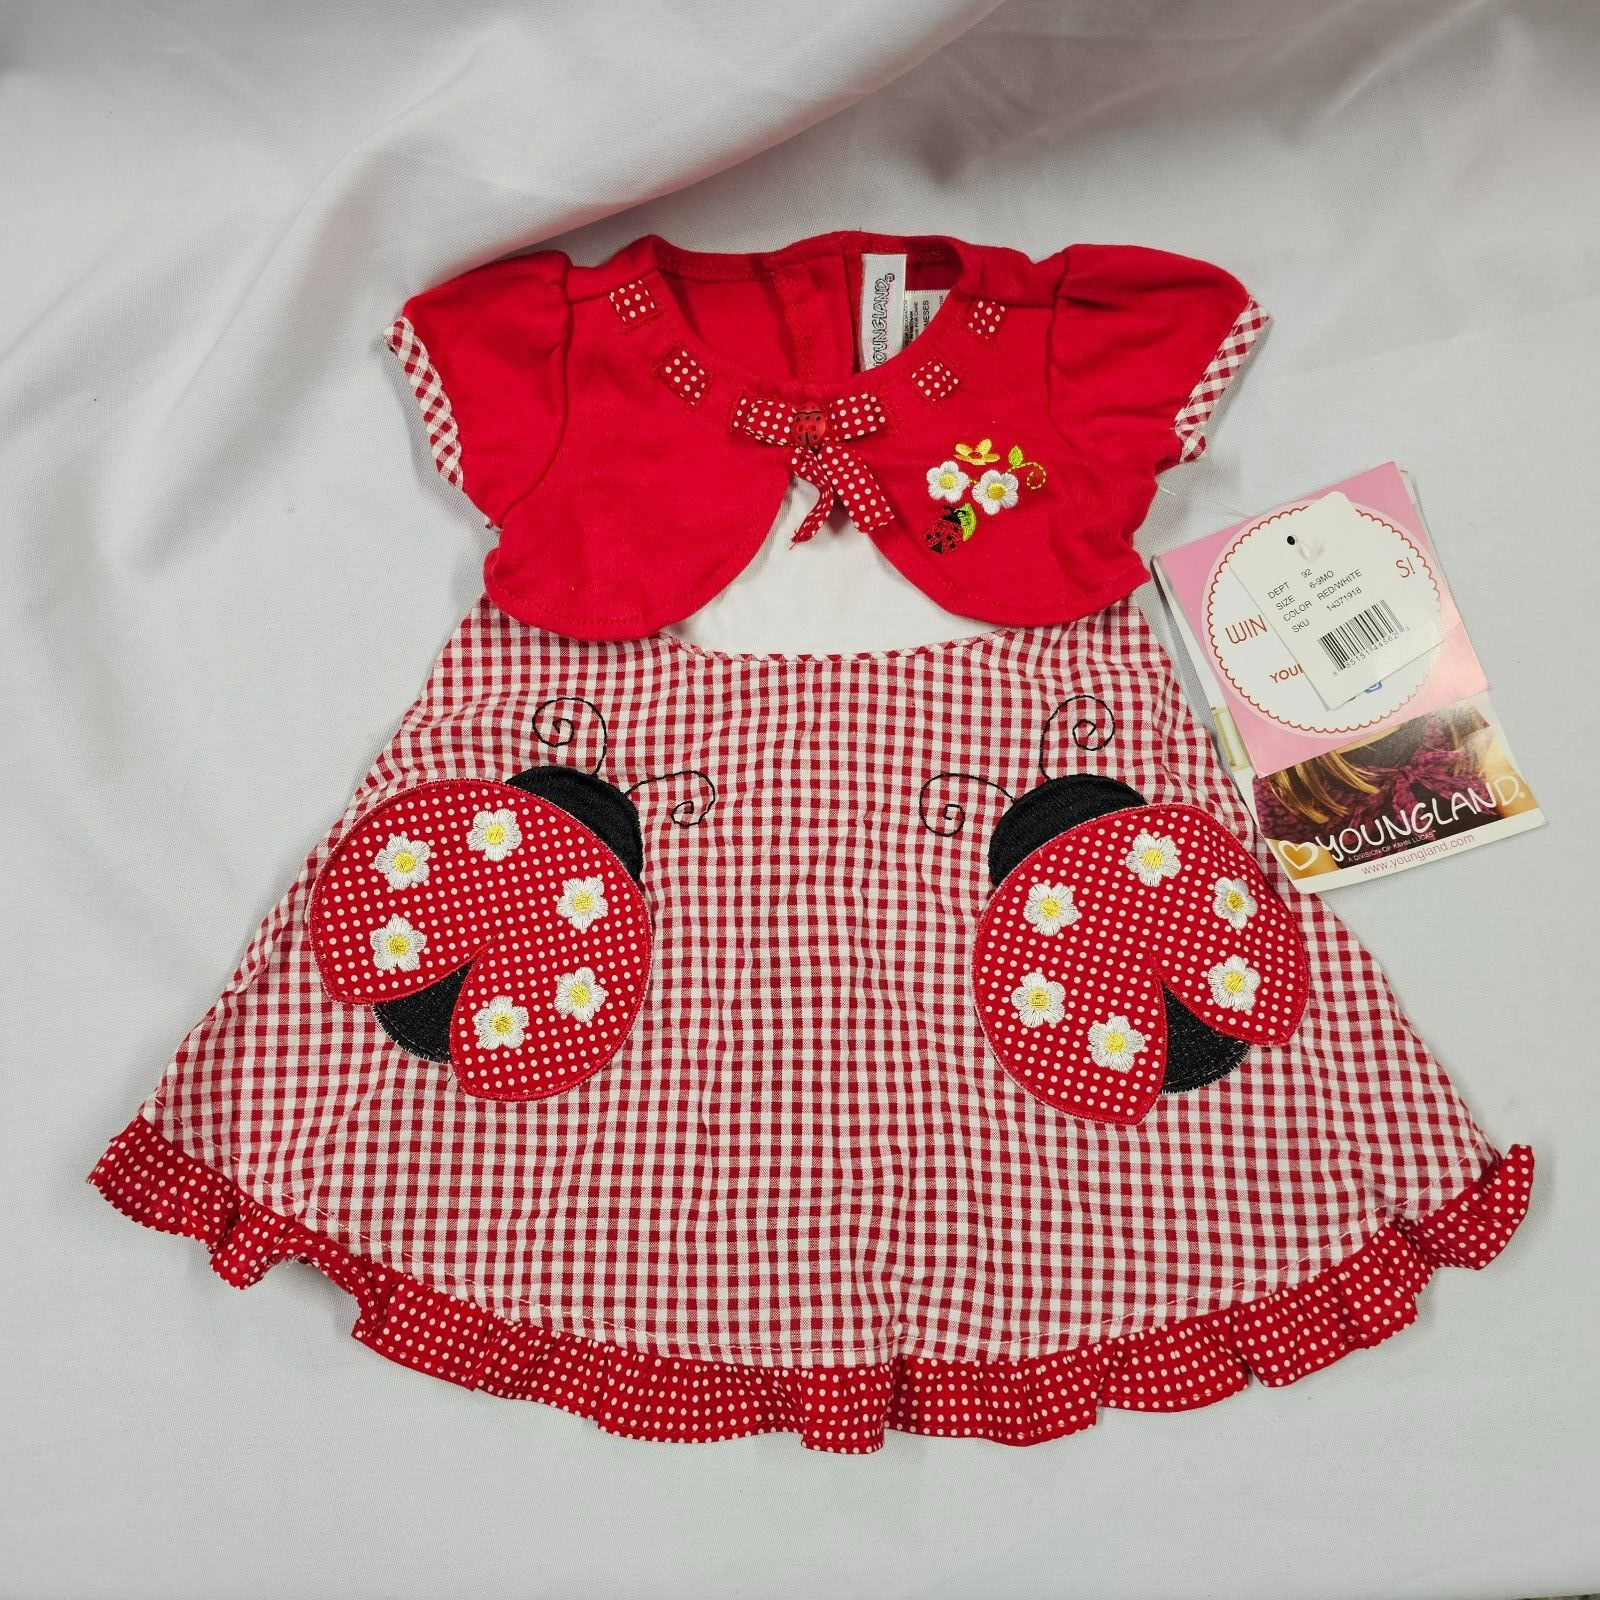 Vintage Baby Dress 6-9 m Youngland Red Gingham Ladybugs Ruffle Checkered Plaid - $13.86